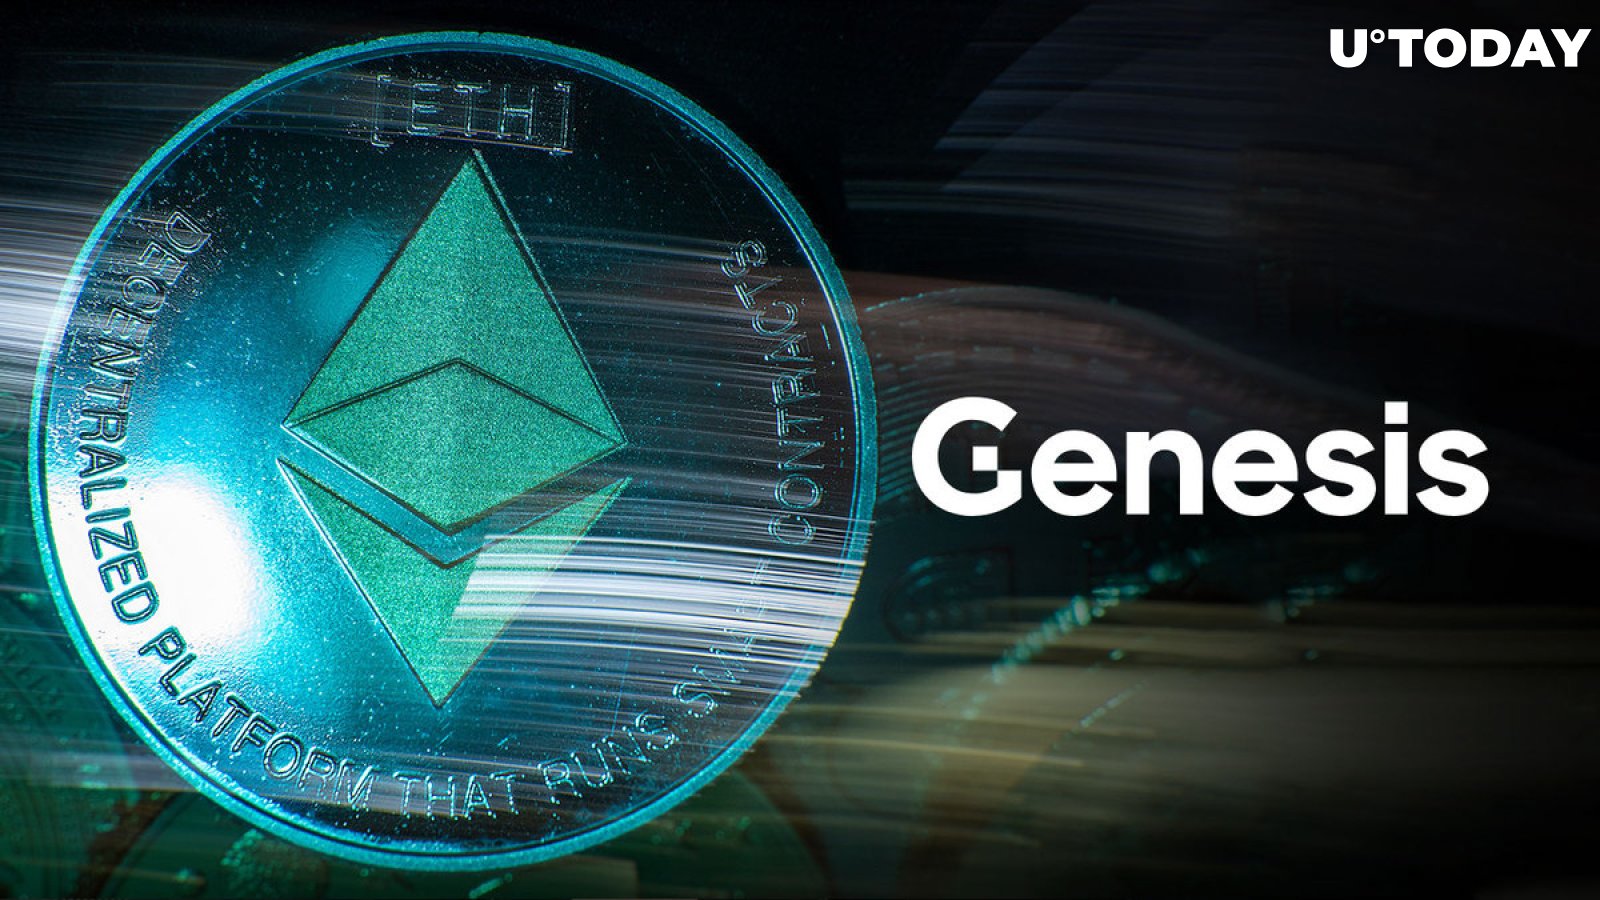 Five New Ethereum Updates Will Change Ethereum Virtual Machine as We Know It: Details